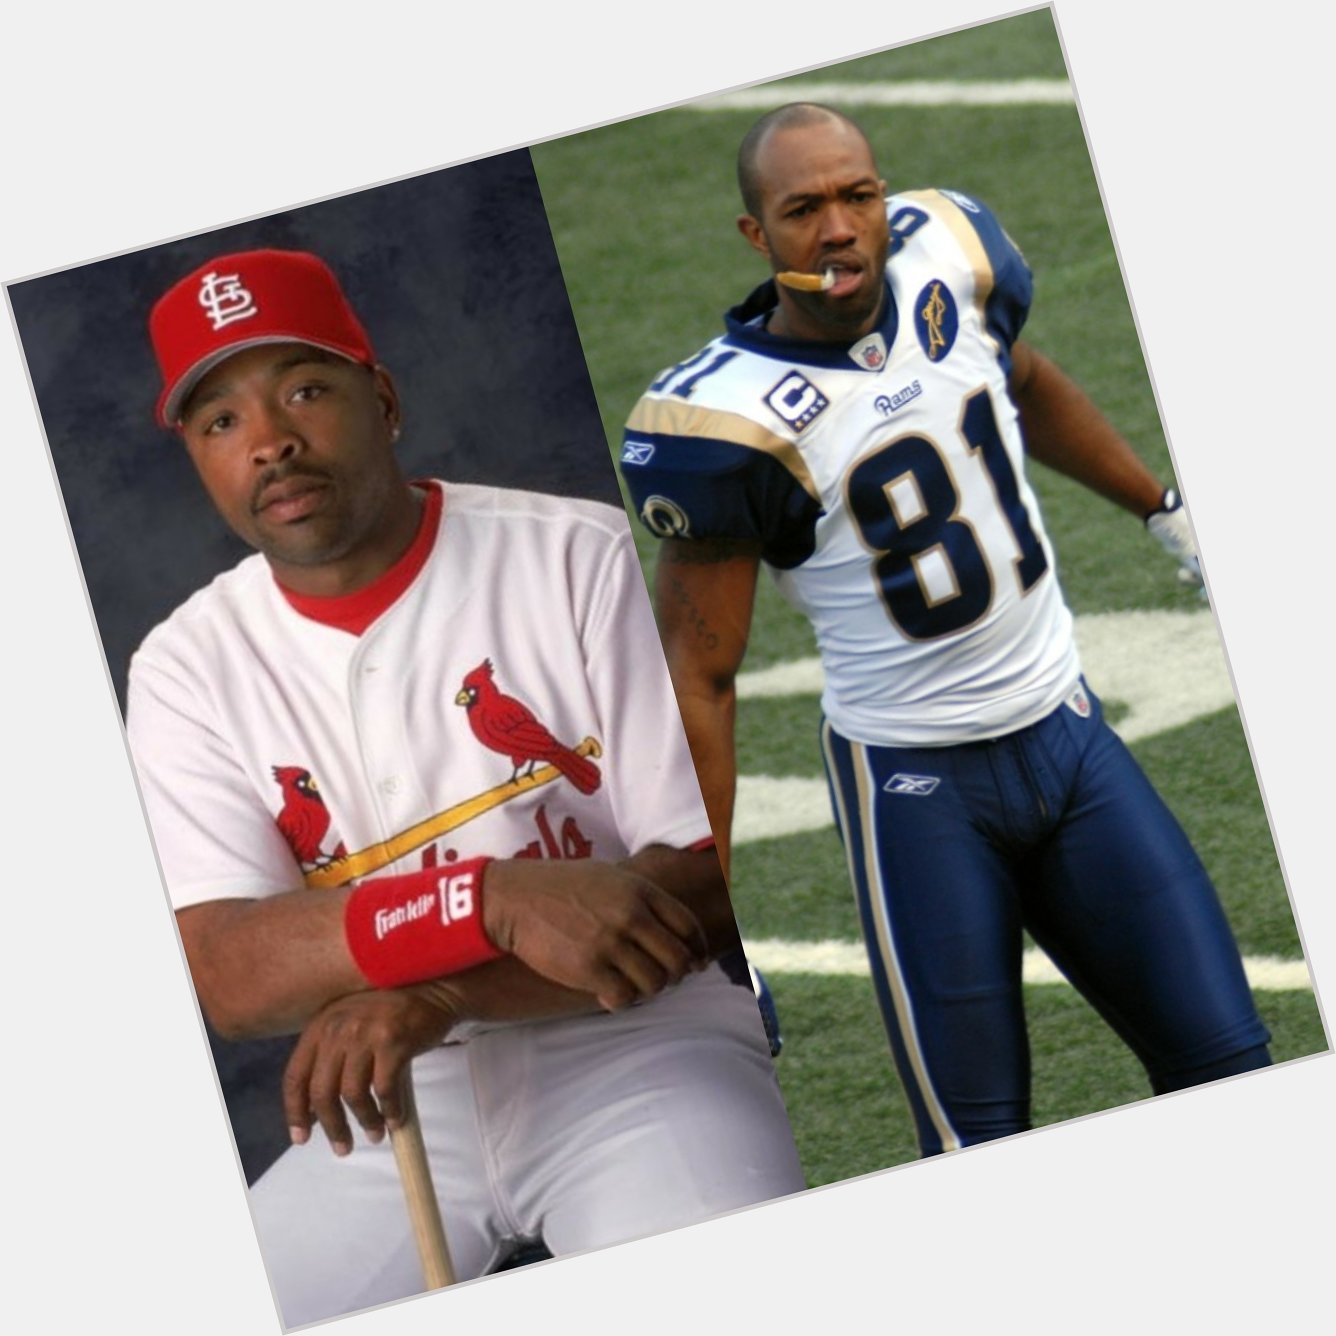 Happy birthday to Ray Lankford and Torry Holt 